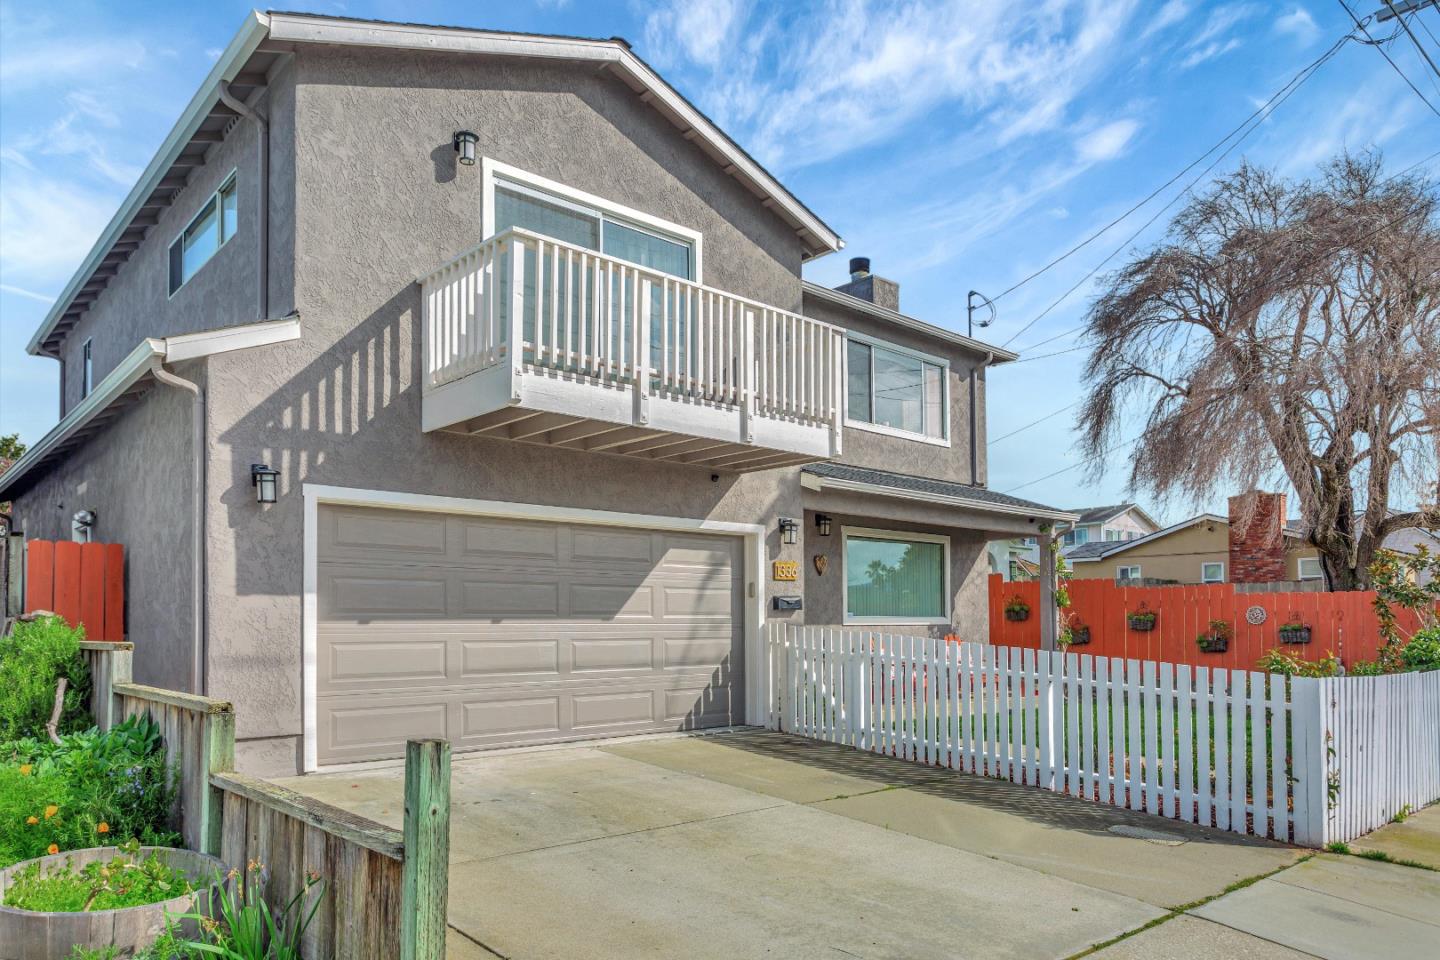 Photo of 1336 Luxton St in Seaside, CA